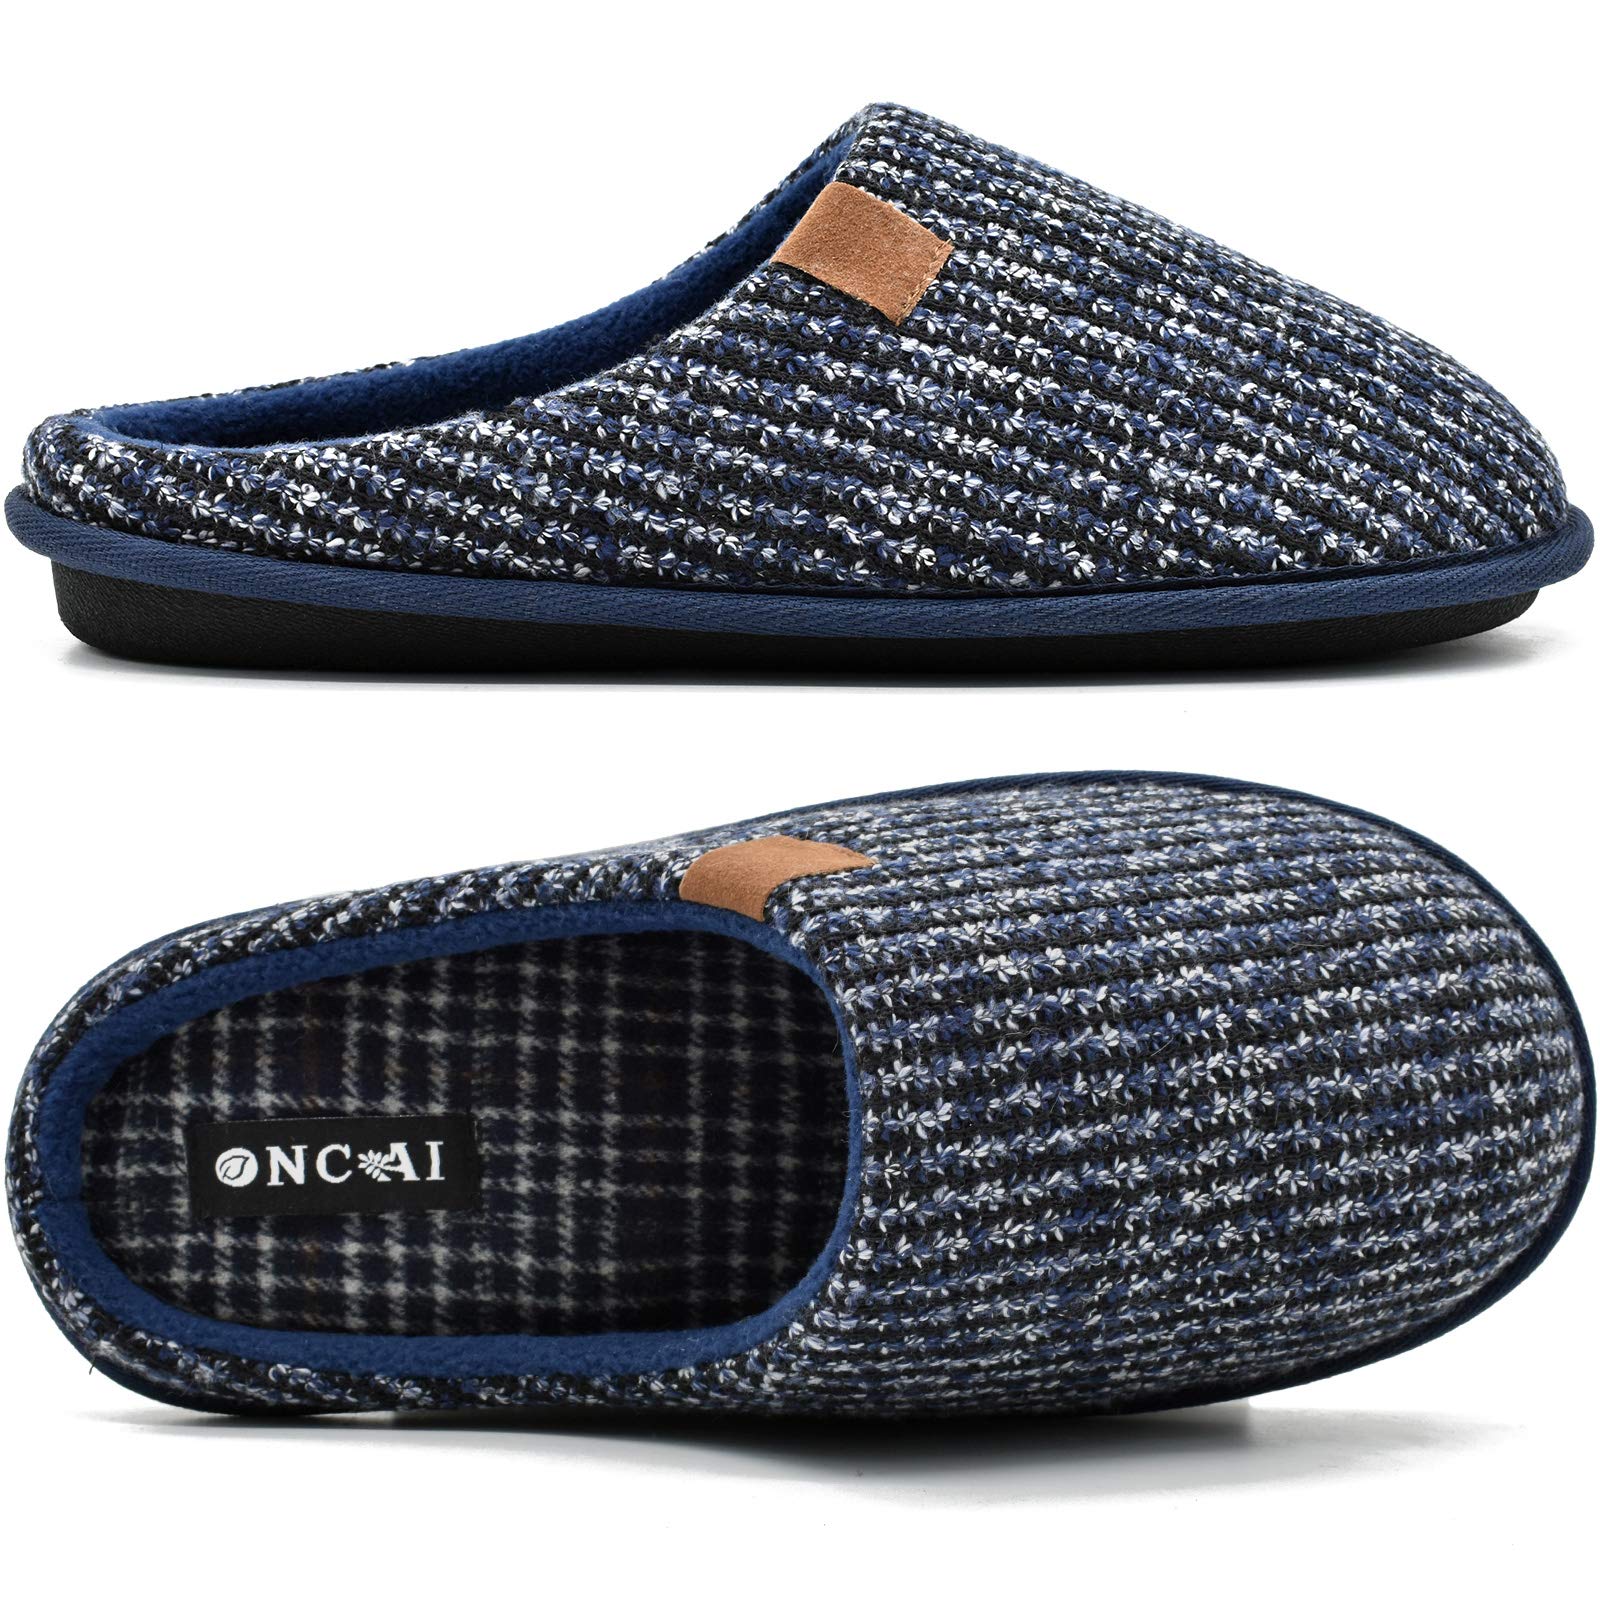 ONCAI Mens Slippers Cozy Memory Foam scuff Slippers Slip On Warm House Shoes Indoor/Outdoor With Best Arch Surpport Size 7-13